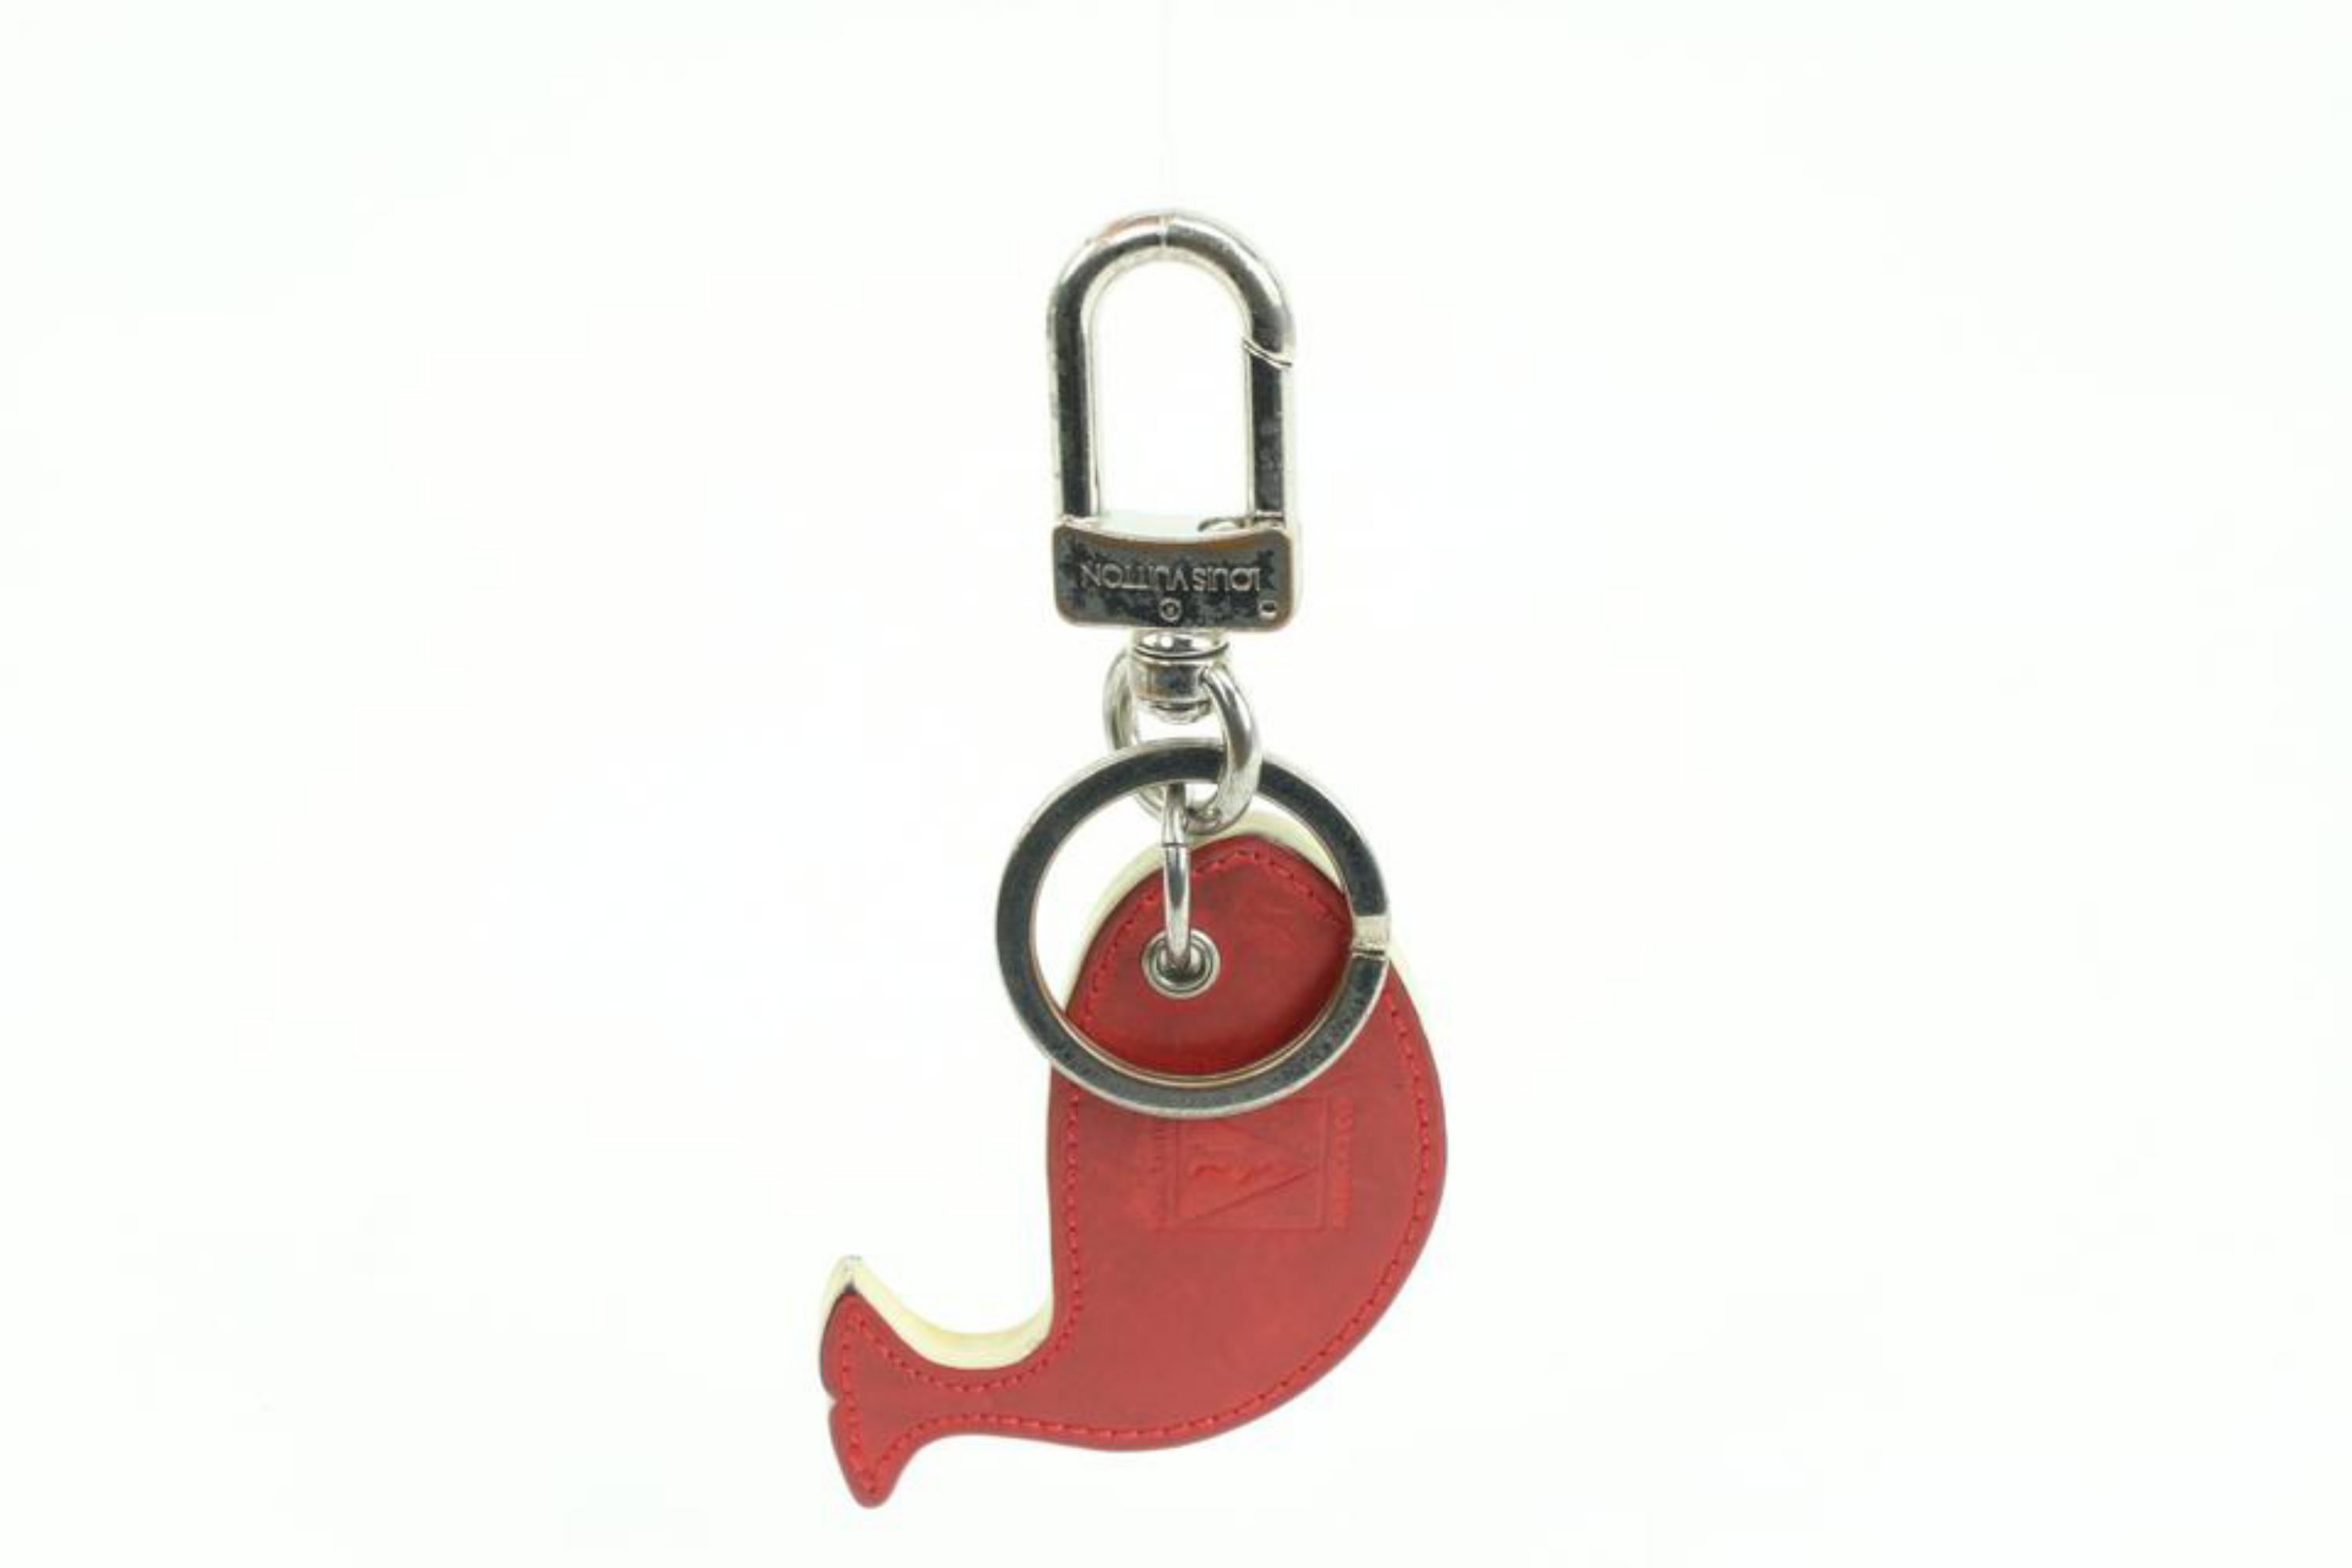 Louis Vuitton LV Americas Cup Gaston V Whale Keychain Bag Charm 2lk412s
Date Code/Serial Number: CX0136
Made In: Italy
Measurements: Length:  2.5